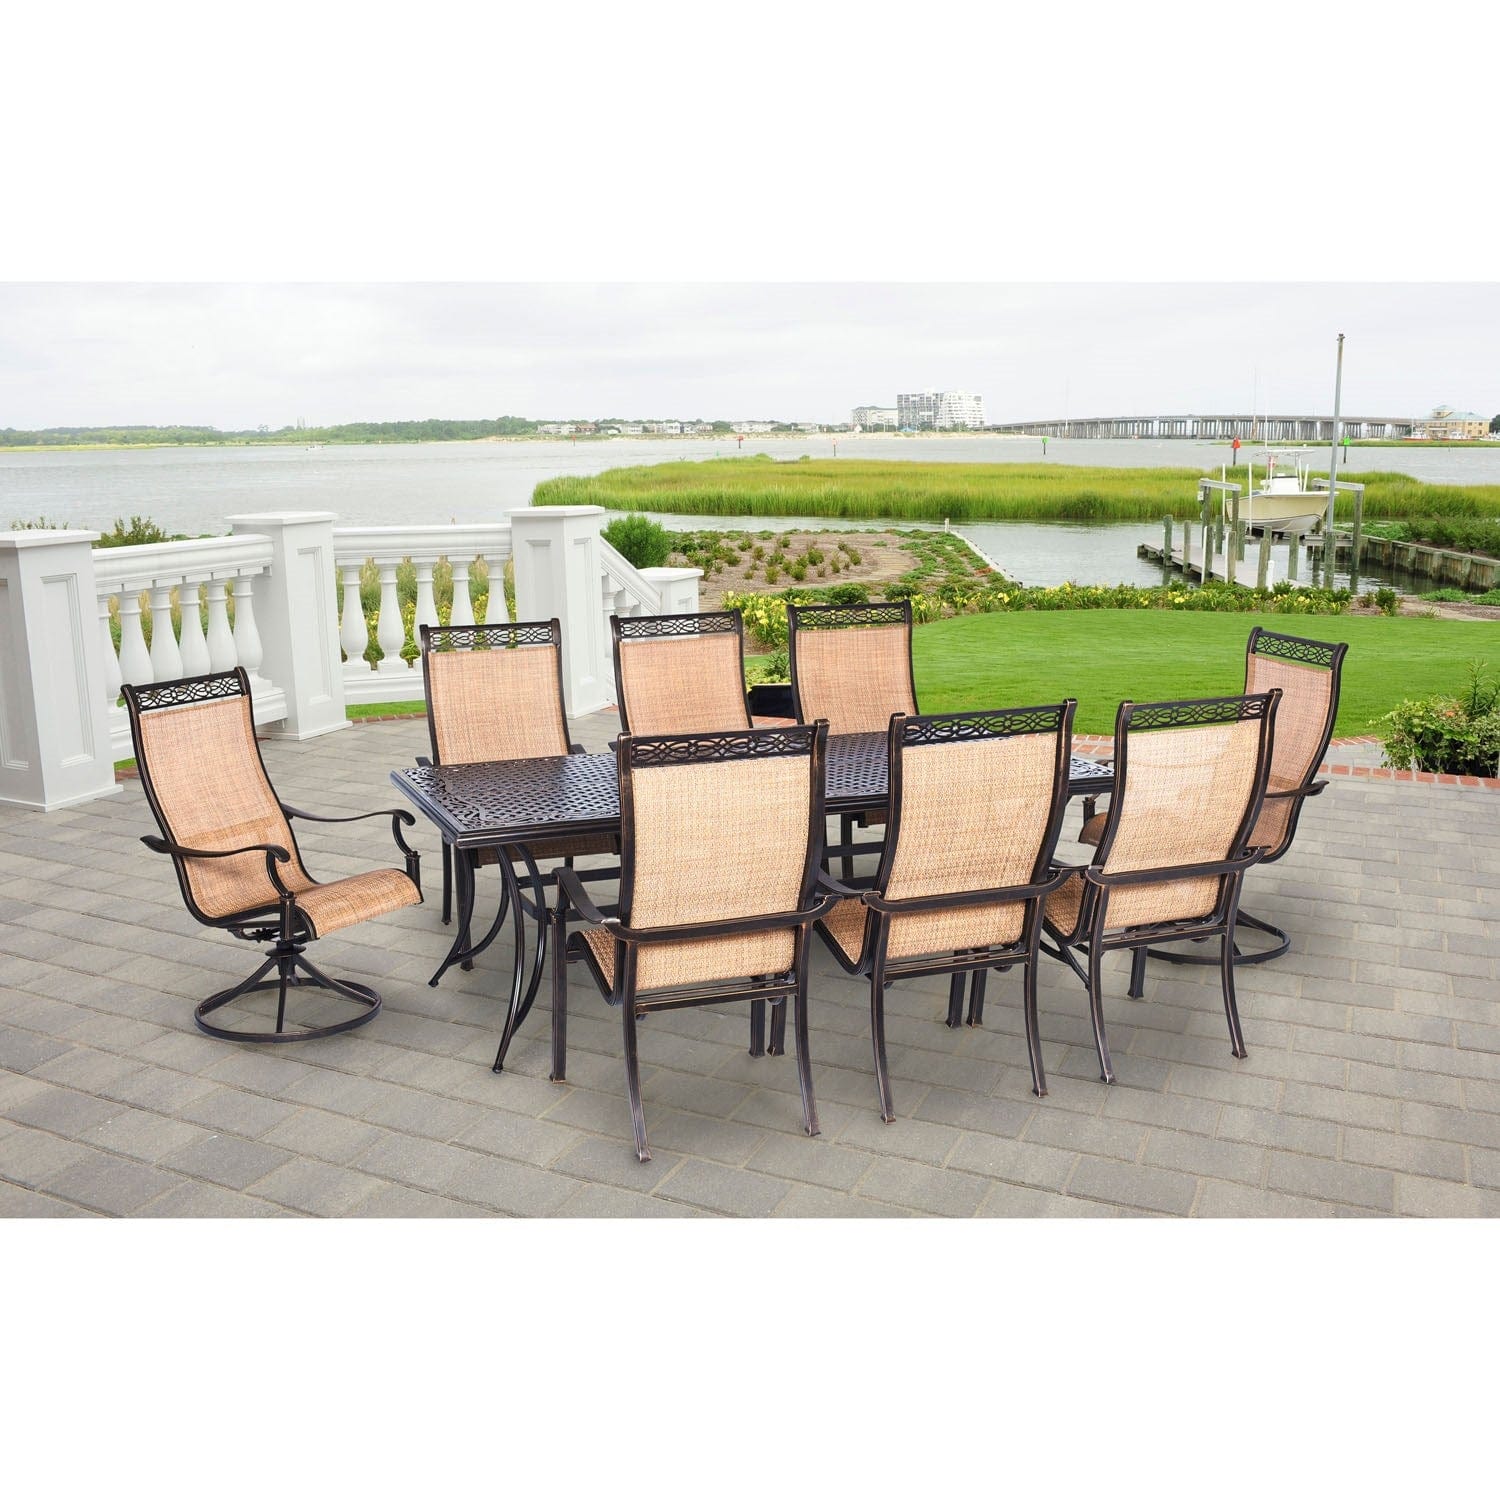 Hanover Outdoor Dining Set Hanover Manor 9-Piece Outdoor Dining Set | 6 Sling Dining Chairs, 2 Sling Swivel Rockers, 42x84" Cast Table | MANDN9PCSW-2